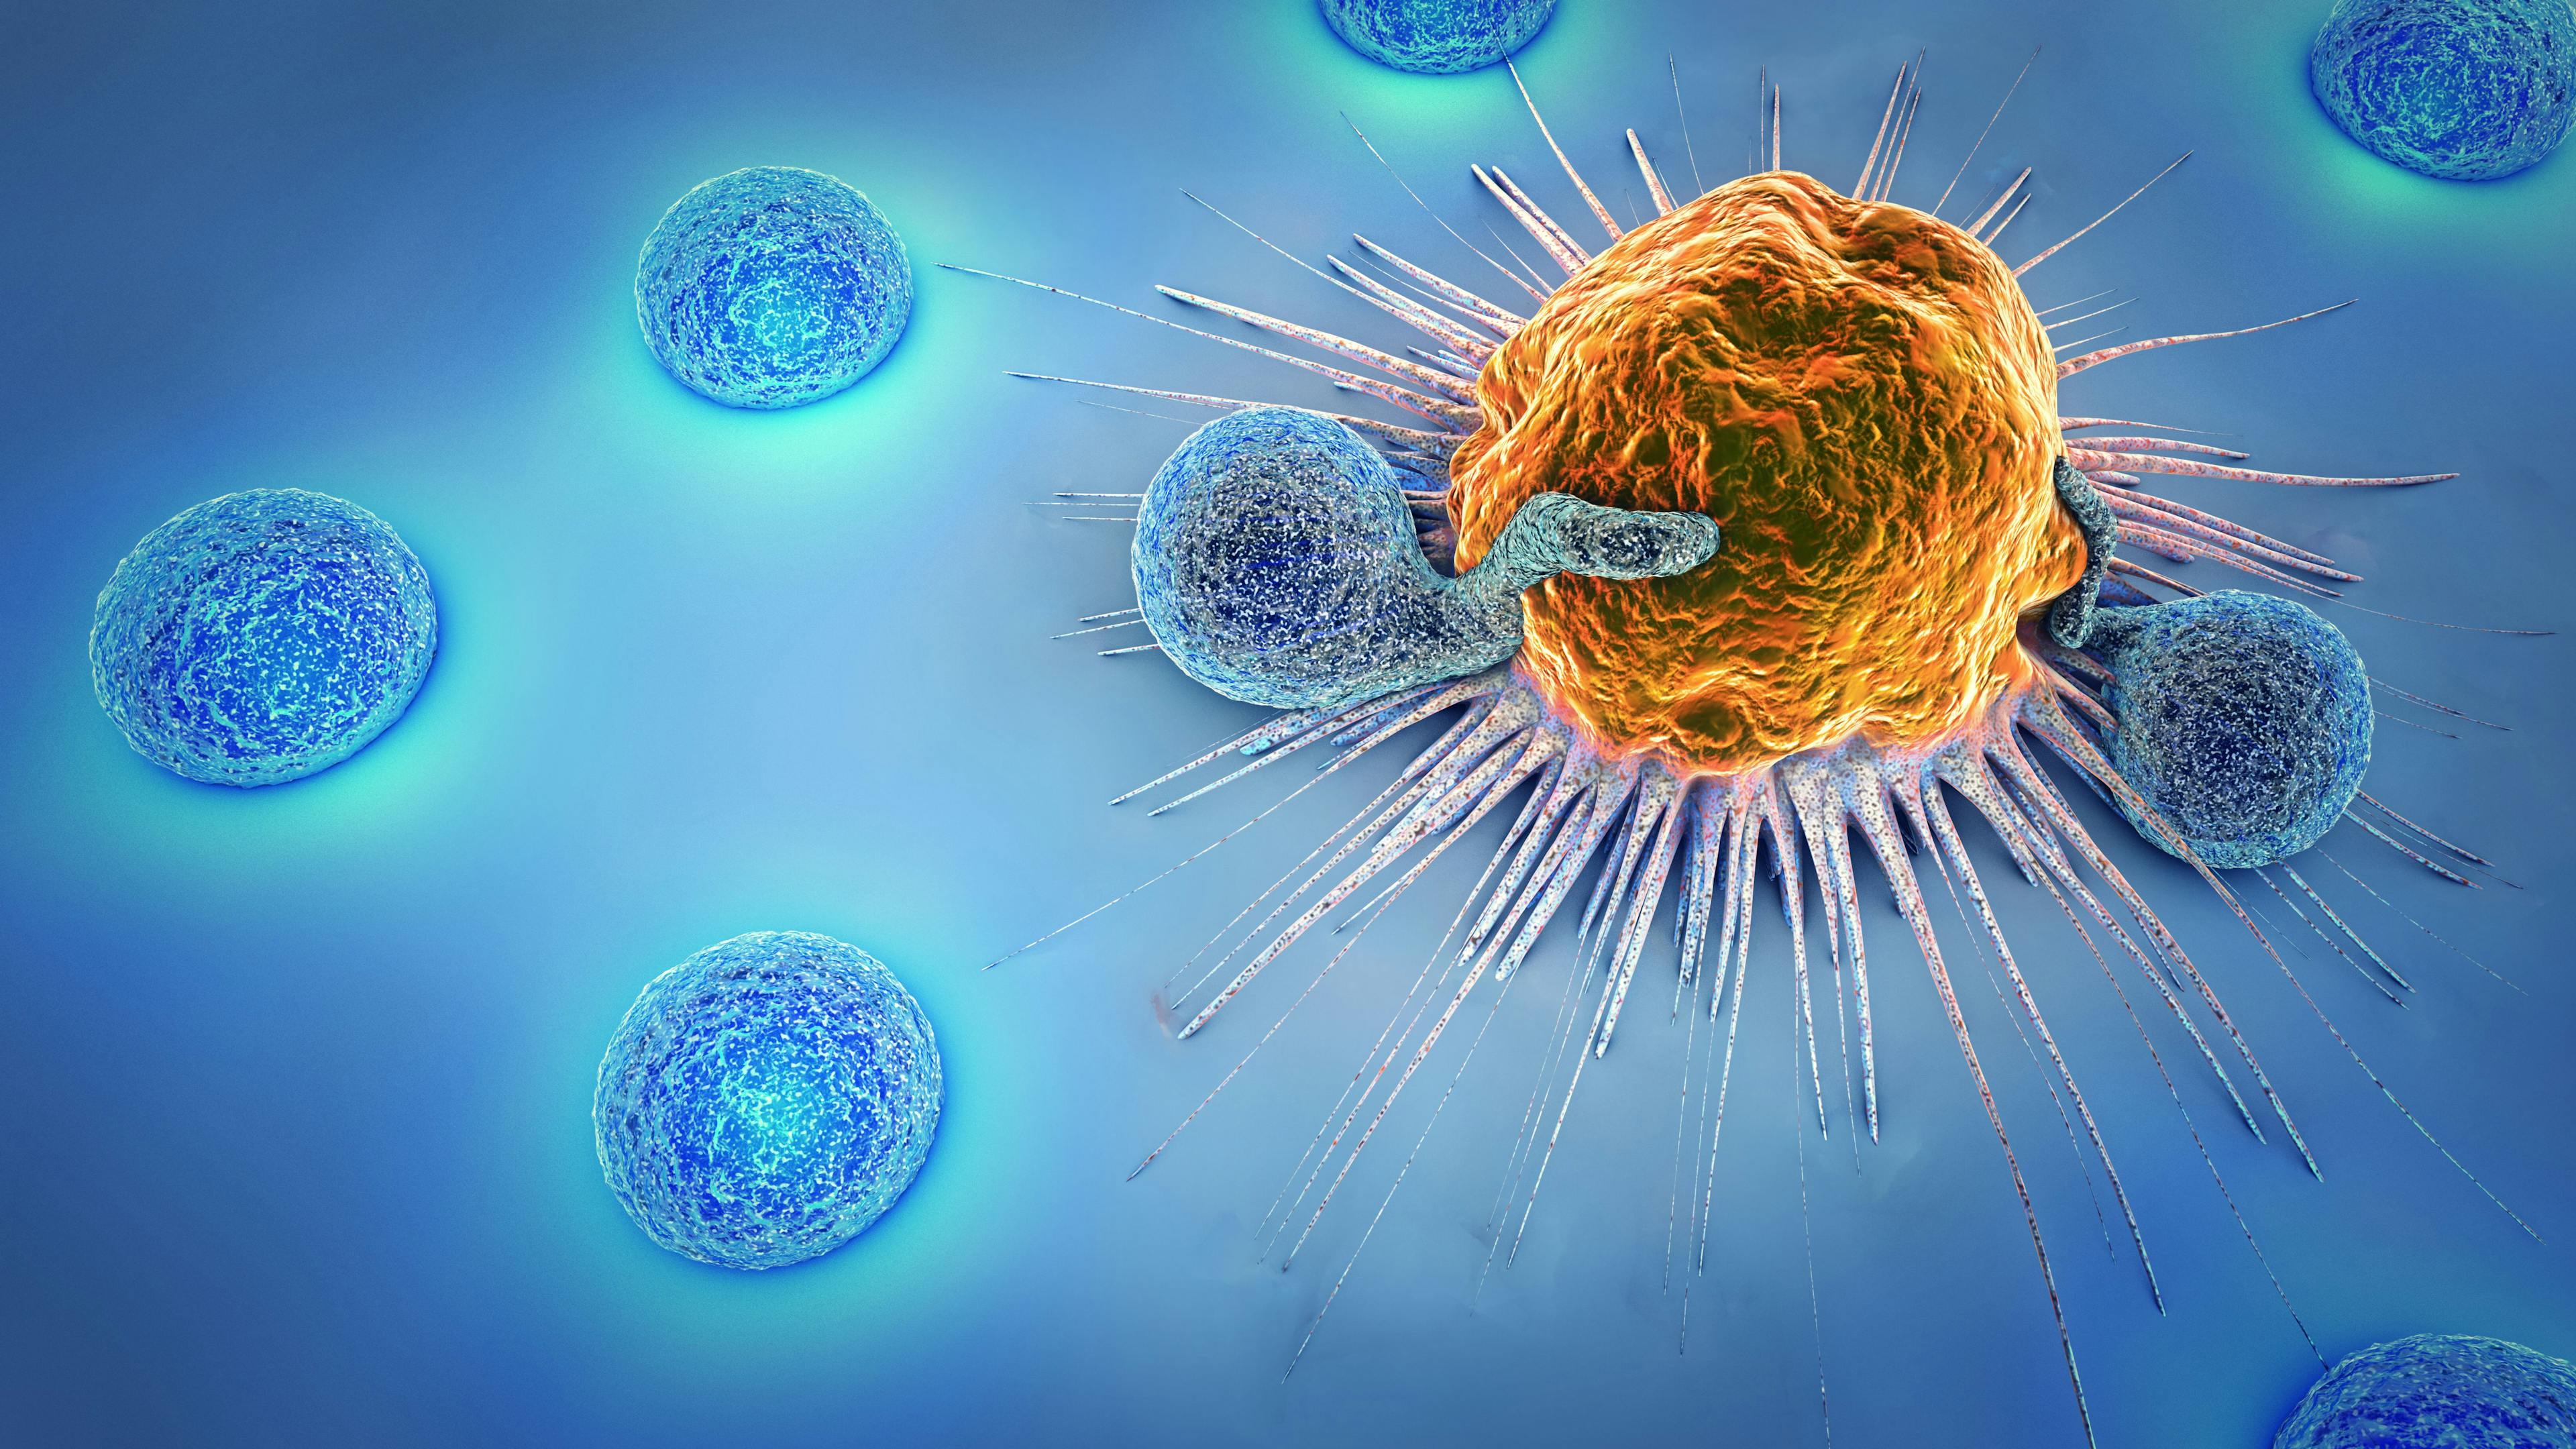 CYNK-101 Demonstrates Anti-Tumor Activity in HNSCC Cells 